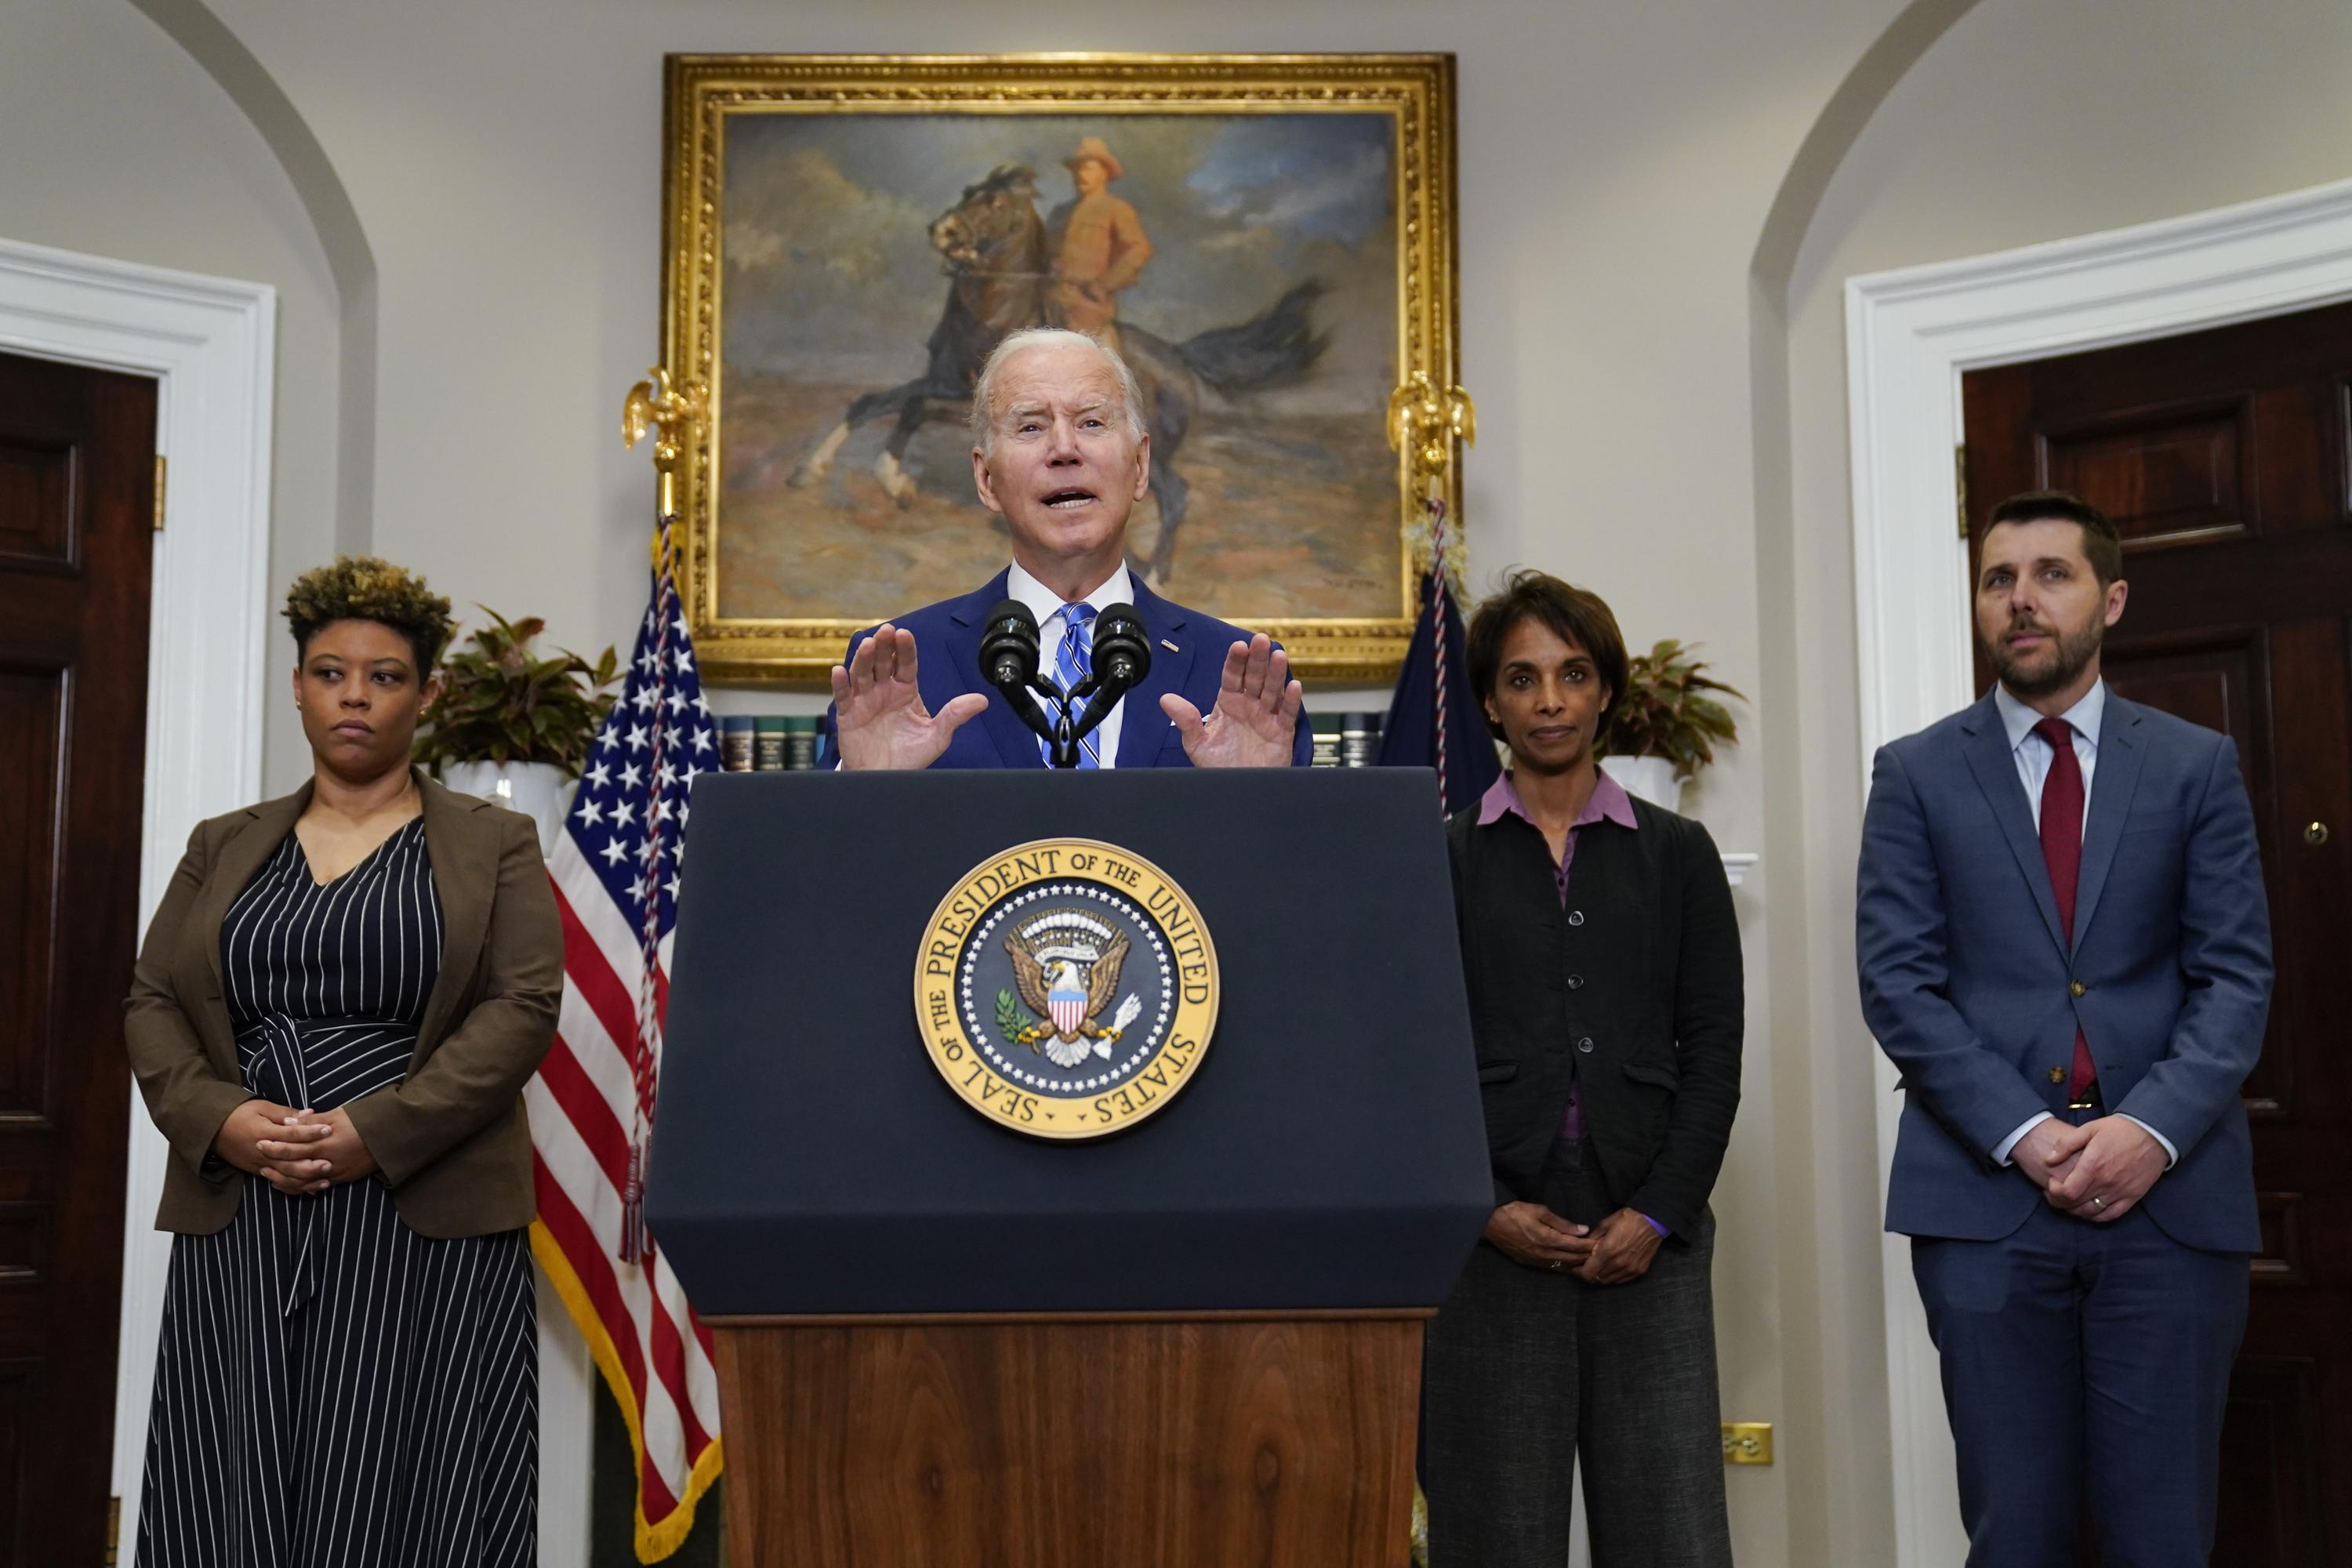 With deficit falling Biden highlights fiscal responsibility – The Associated Press